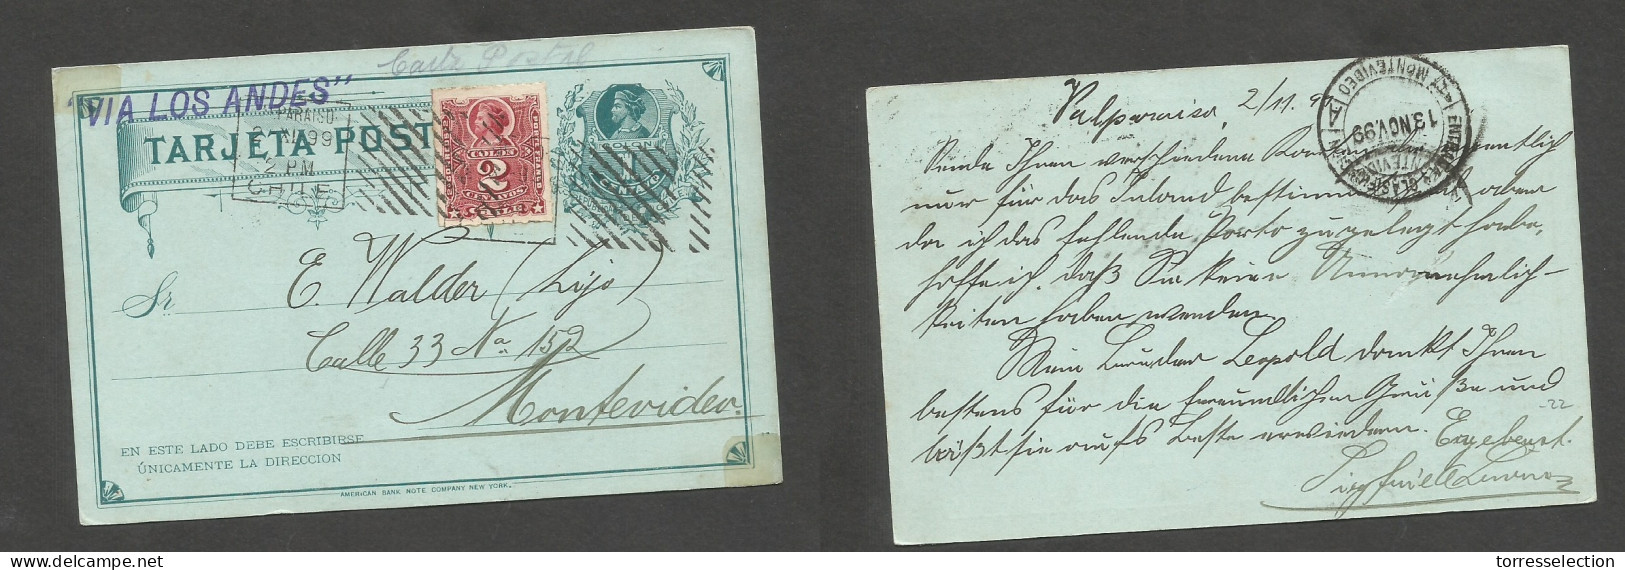 CHILE - Stationery. 1899 (2 Nov) Valp - Montevideo, Uruguay Via Los Andes, 1c Green Stat Card + 2c Red Perce Adtl, Tied  - Chili